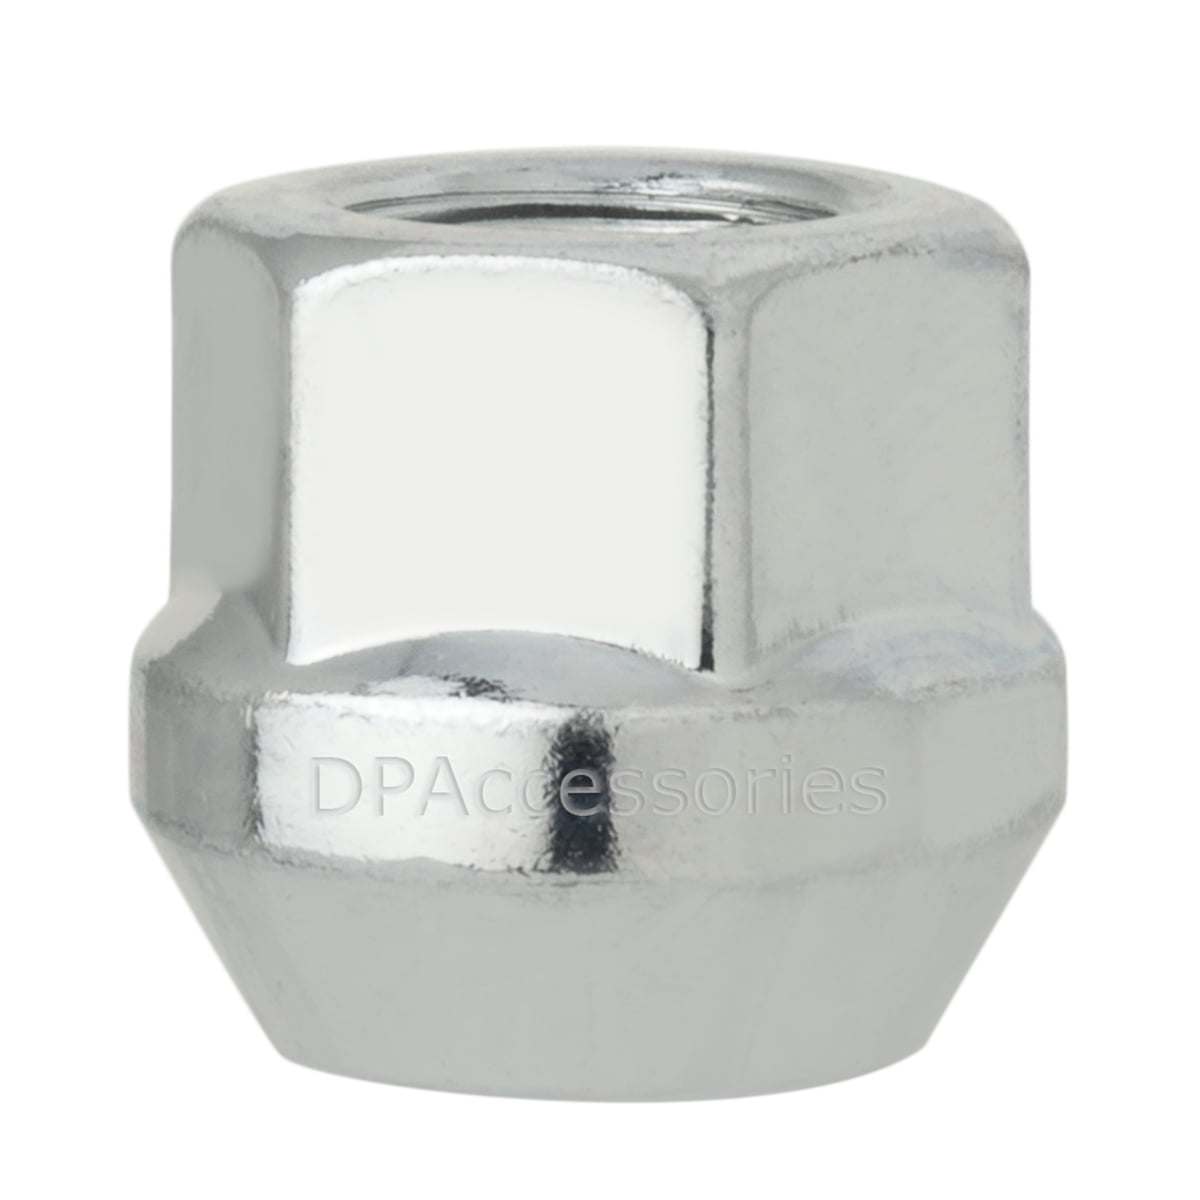 DPAccessories D2129-2308/32 32 Silver 14x2 Open End Bulge Acorn Lug Nuts for Aftermarket Wheels Cone Seat 